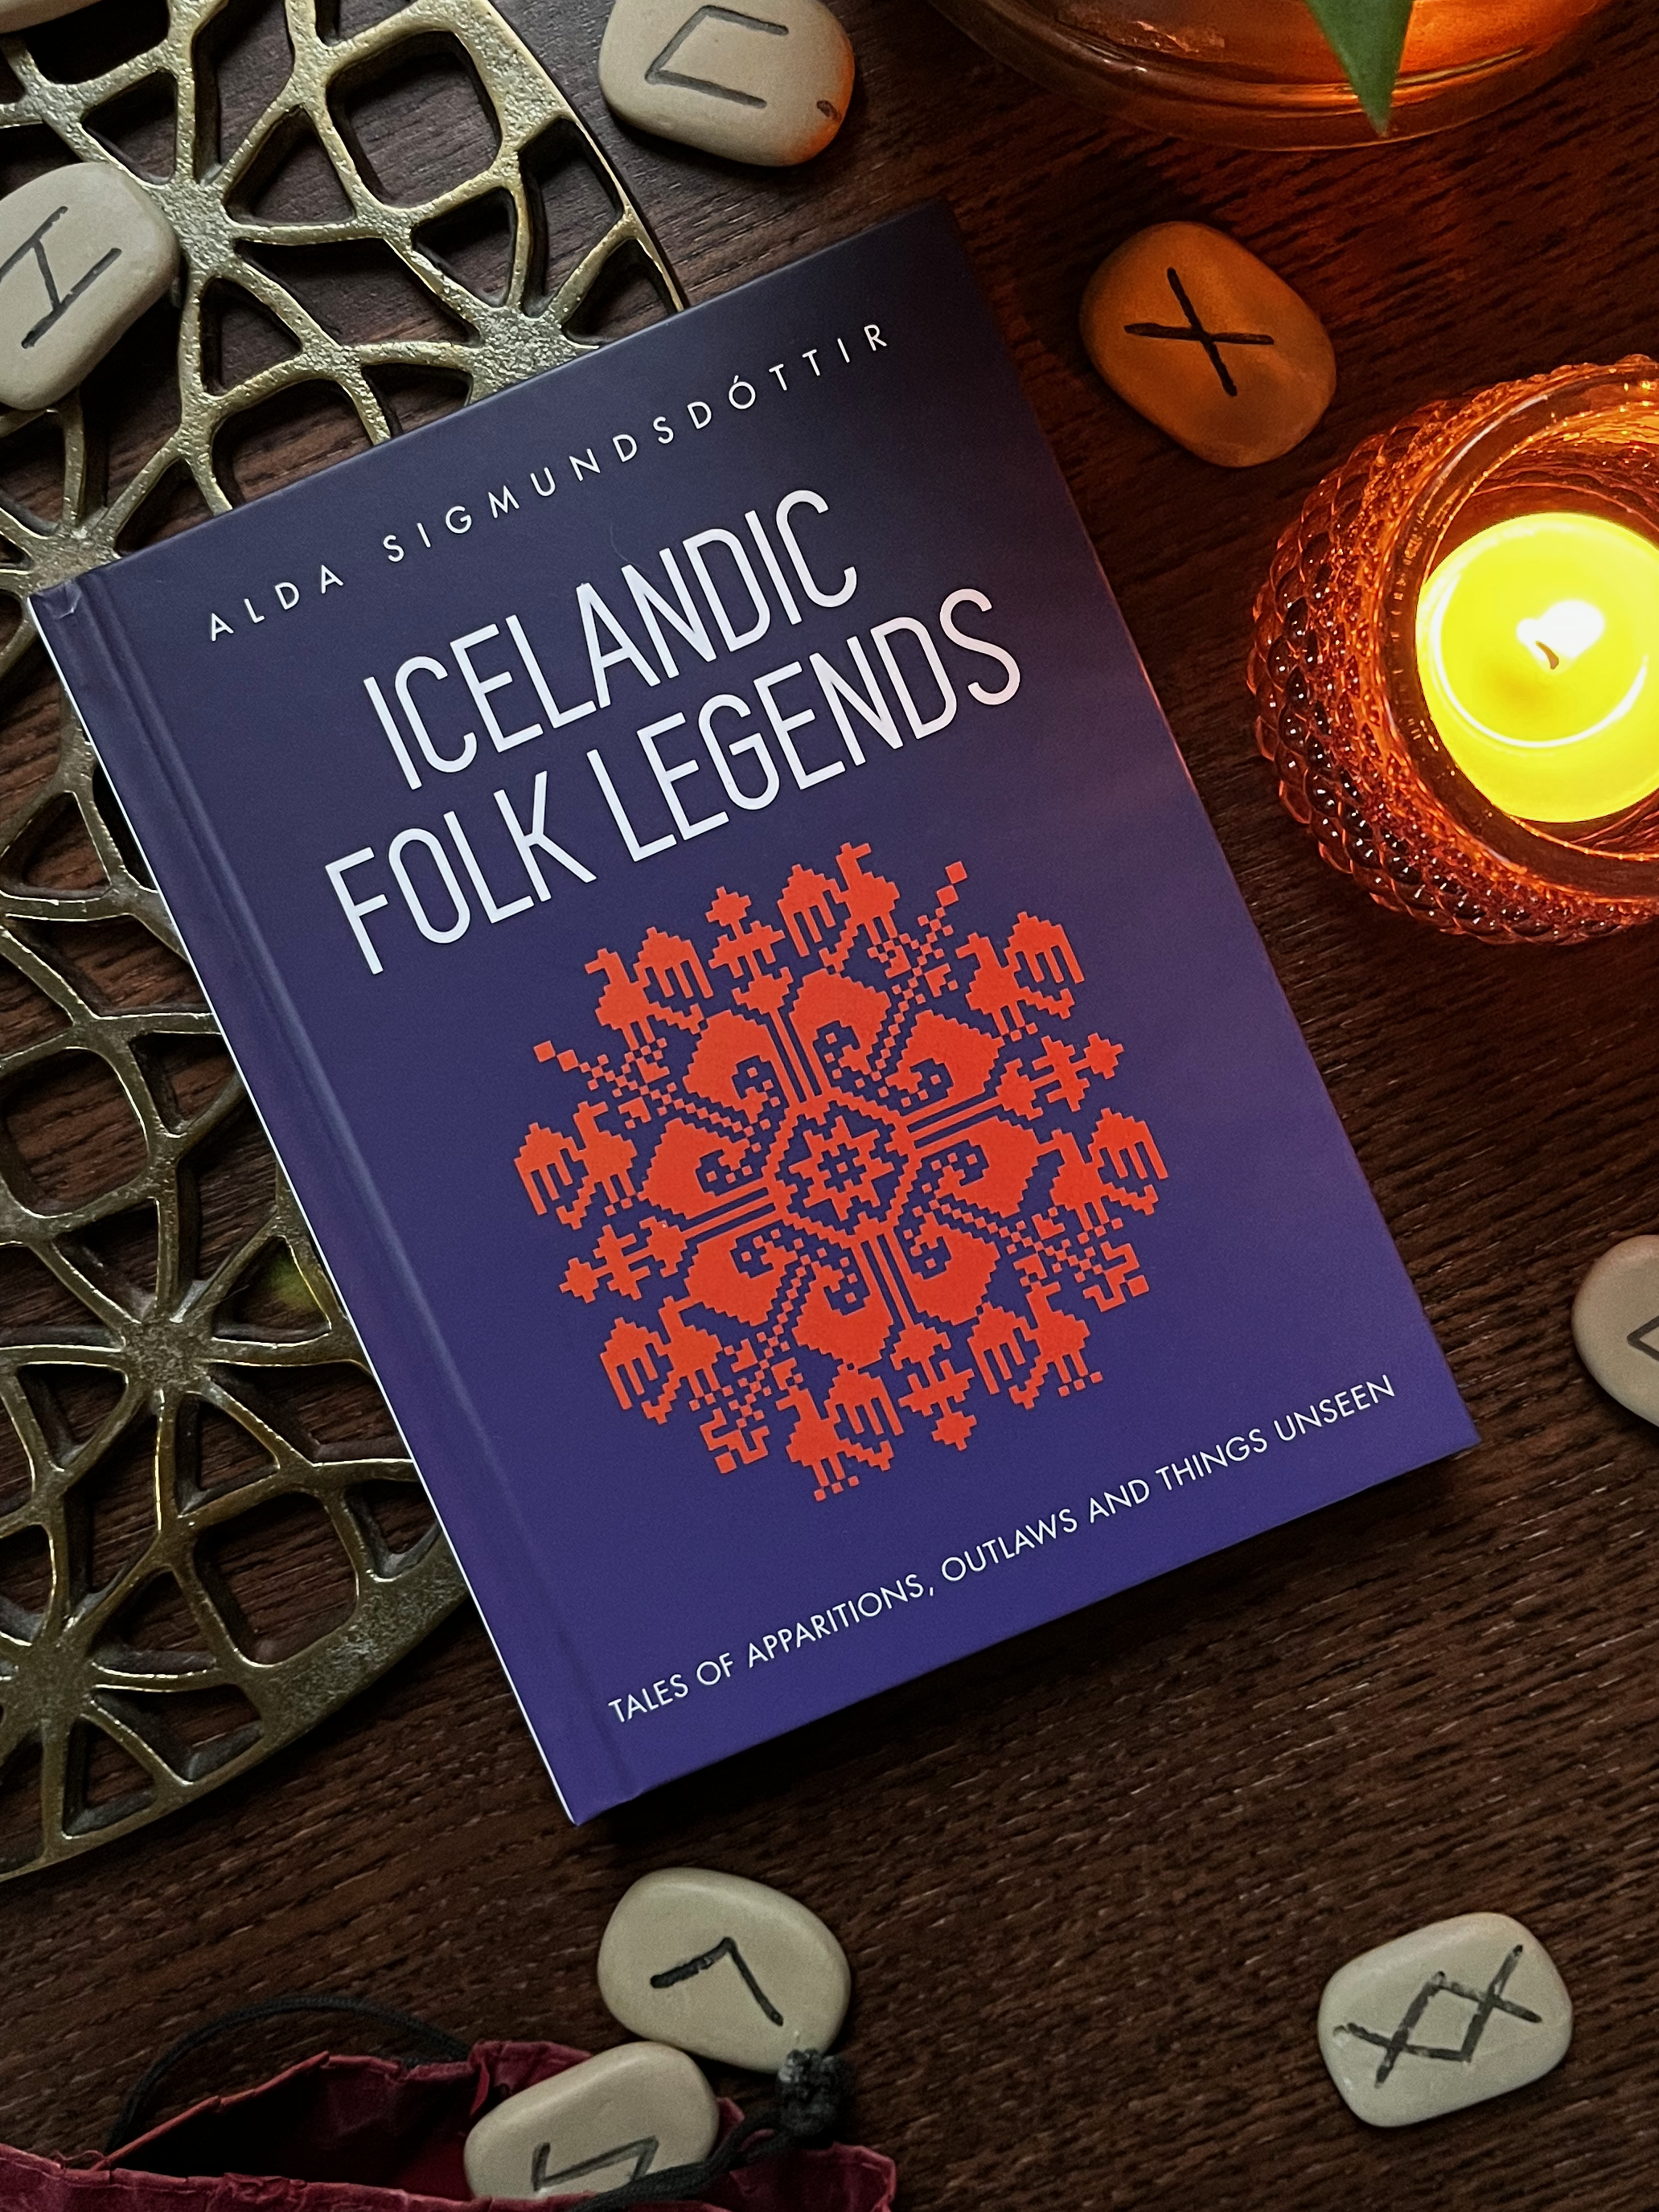 Two copies of Icelandic Folk Legends lying on a table next to a plant